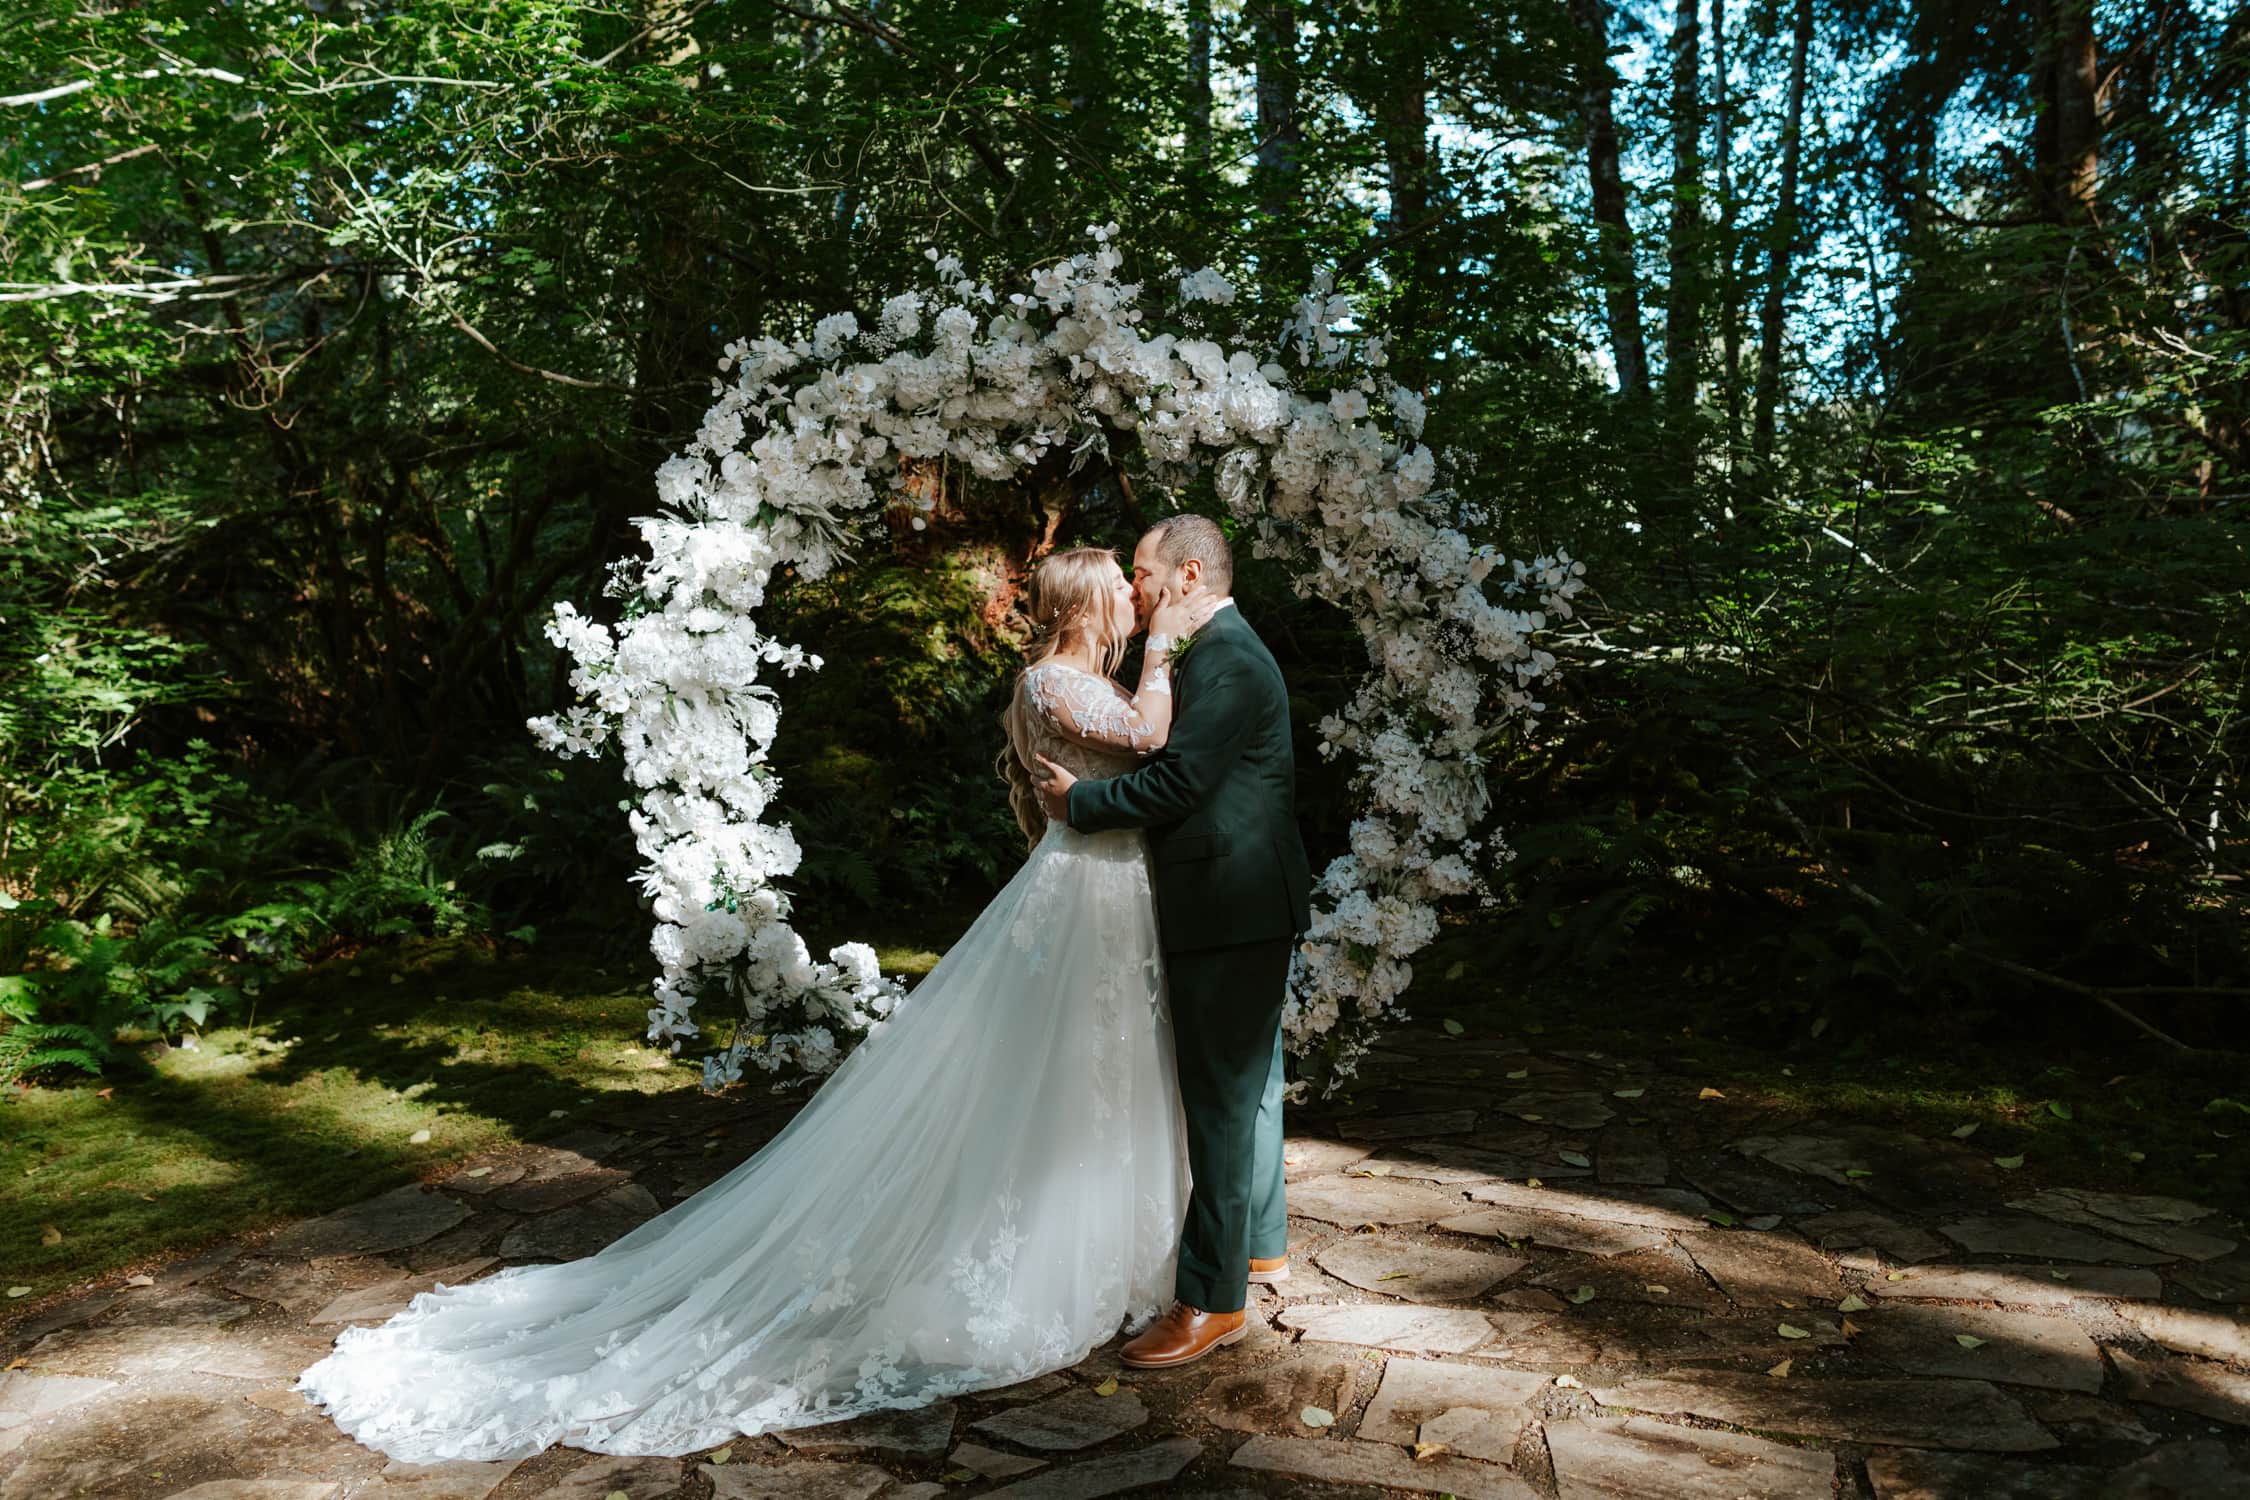 A bride and groom sharing a first kiss at the altar at Fern Acres.